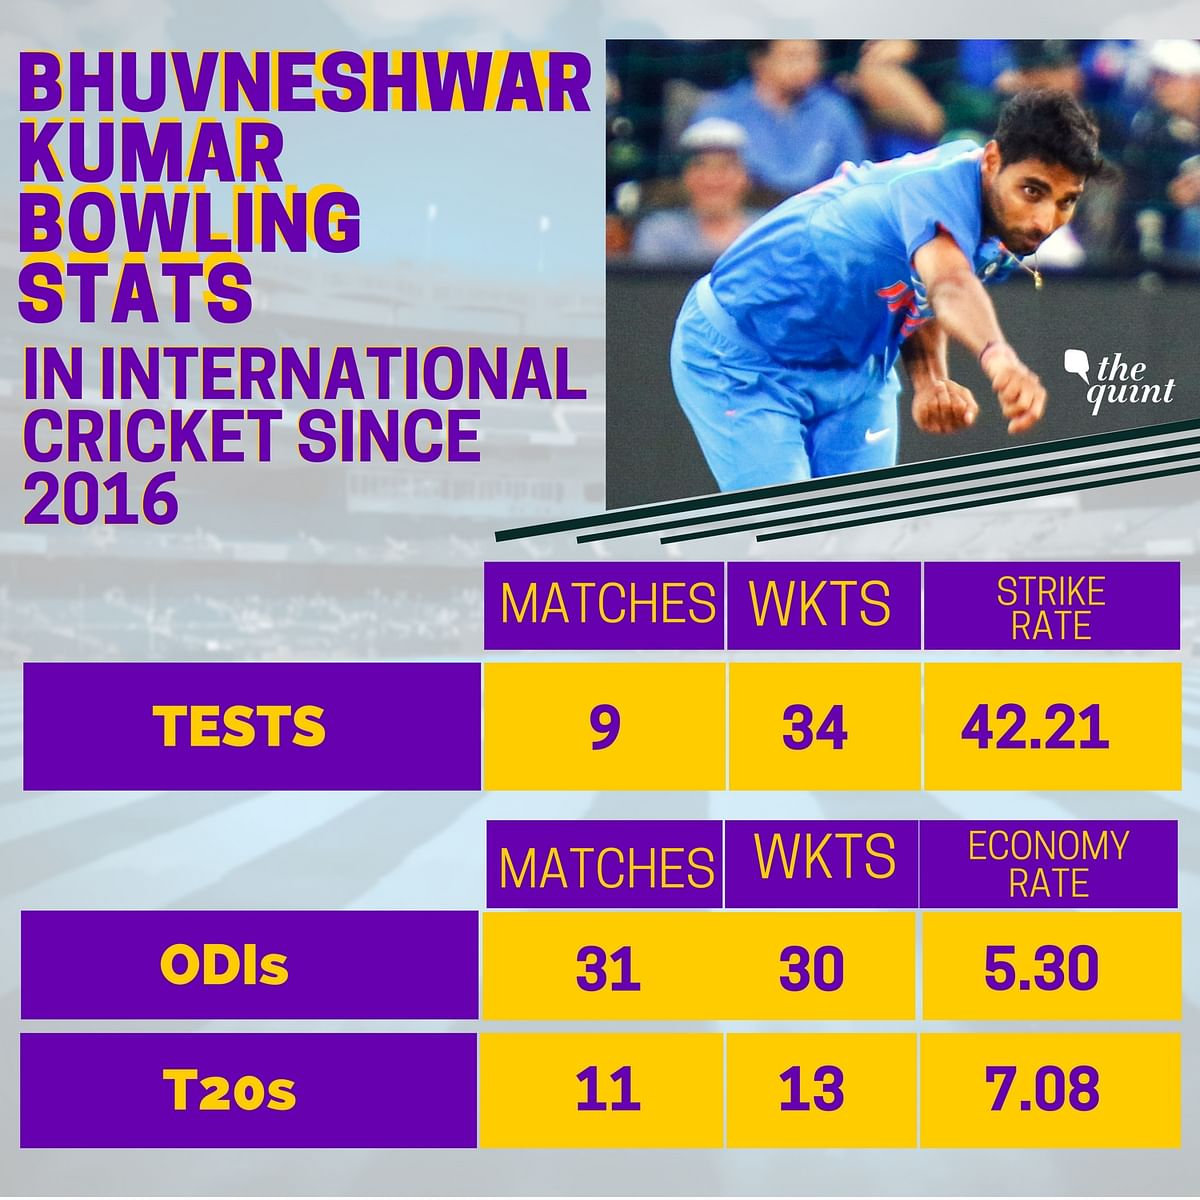 Bhuvneshwar Kumar has become the complete bowler, and an integral part of the Indian team across formats.